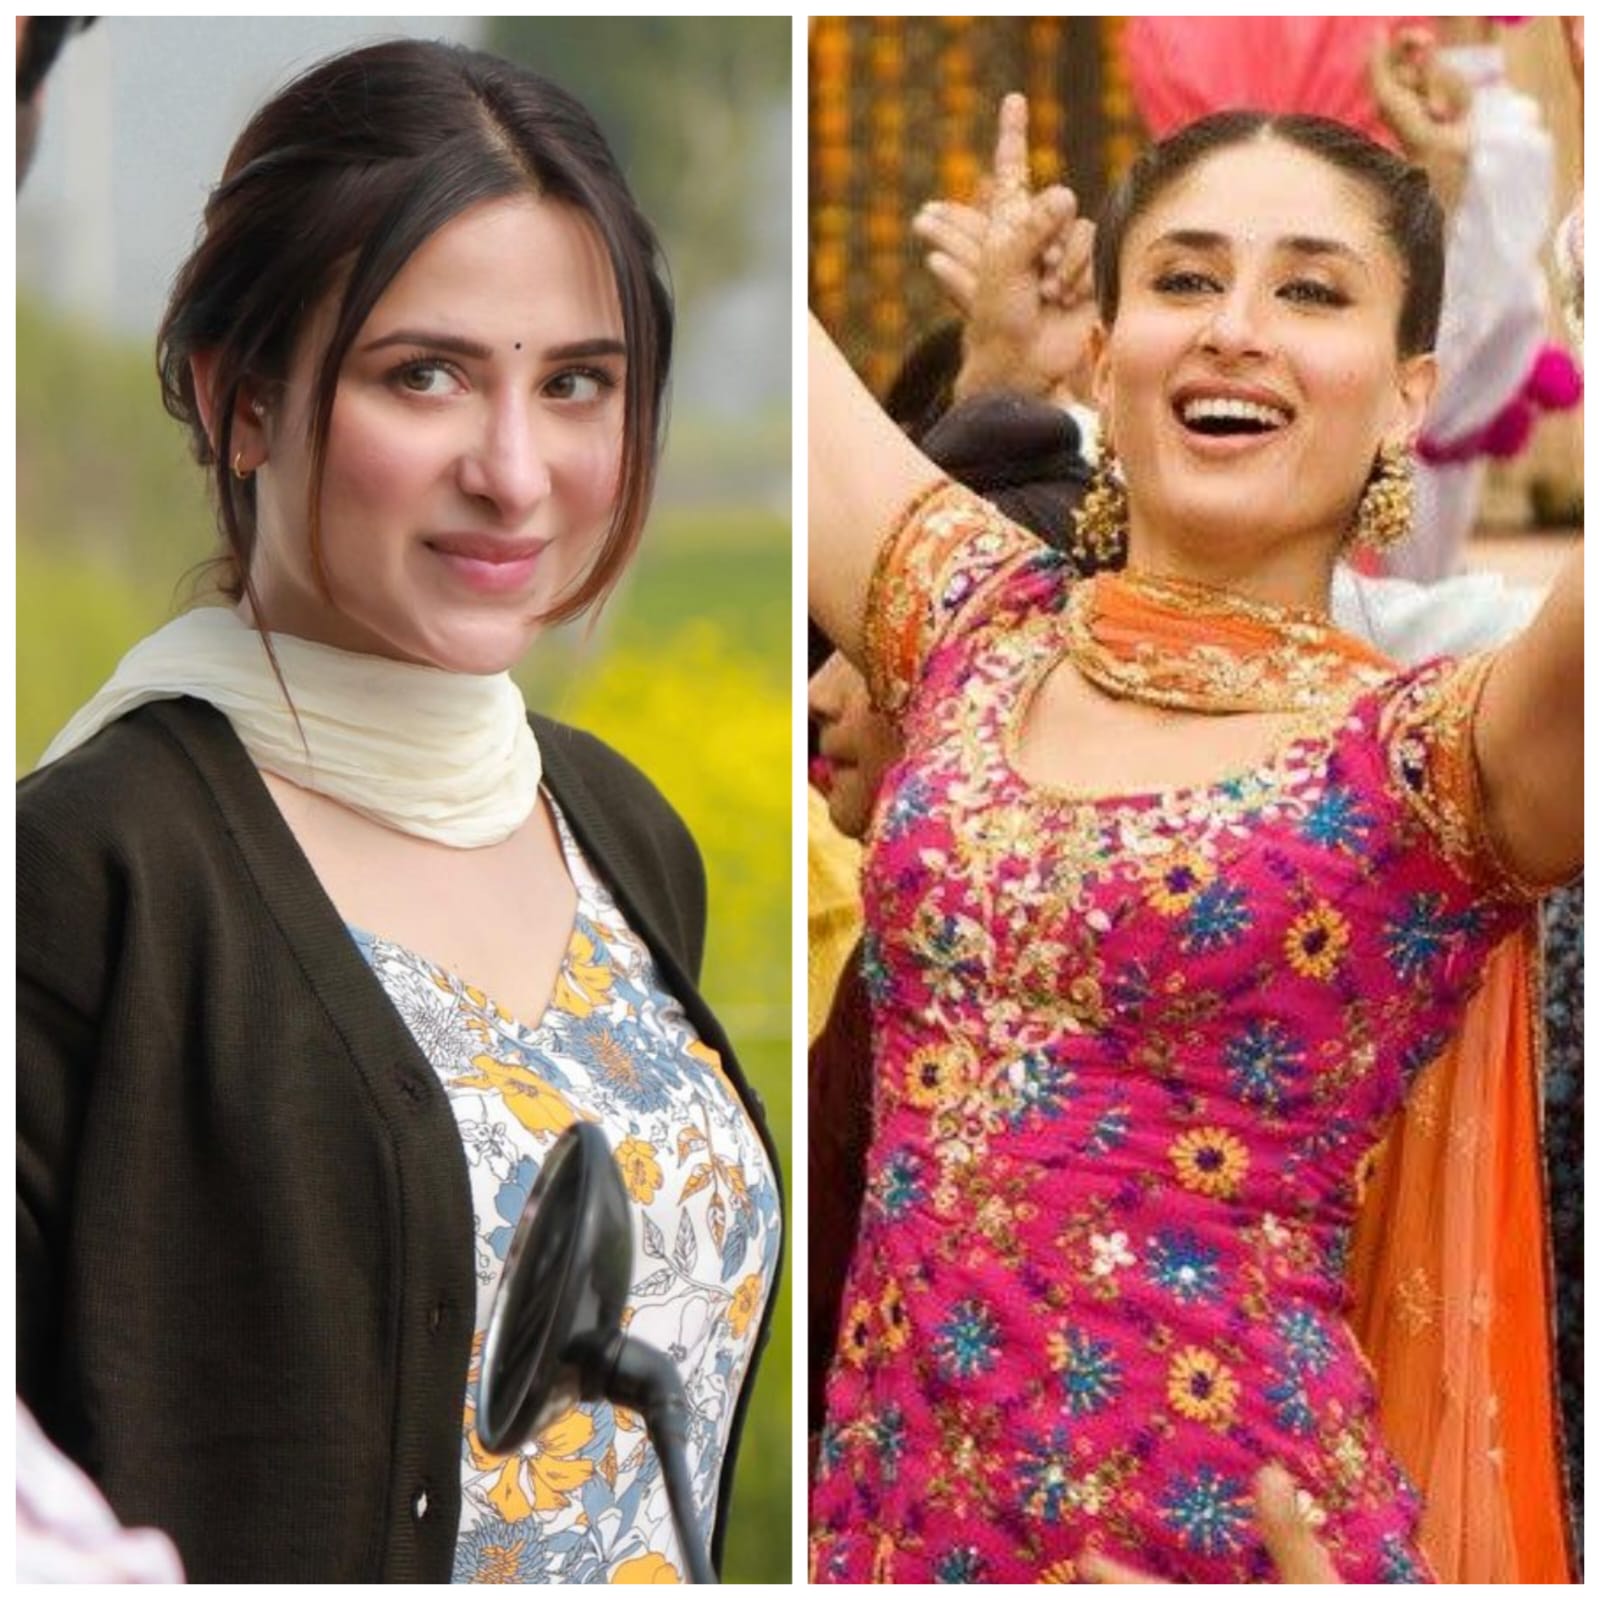 Mahira Sharma's recent post in a simple salwar suit grabs all the attention of her fans, netizens dub her replica of Kareena Kapoor Khan from the movie Jab We Met